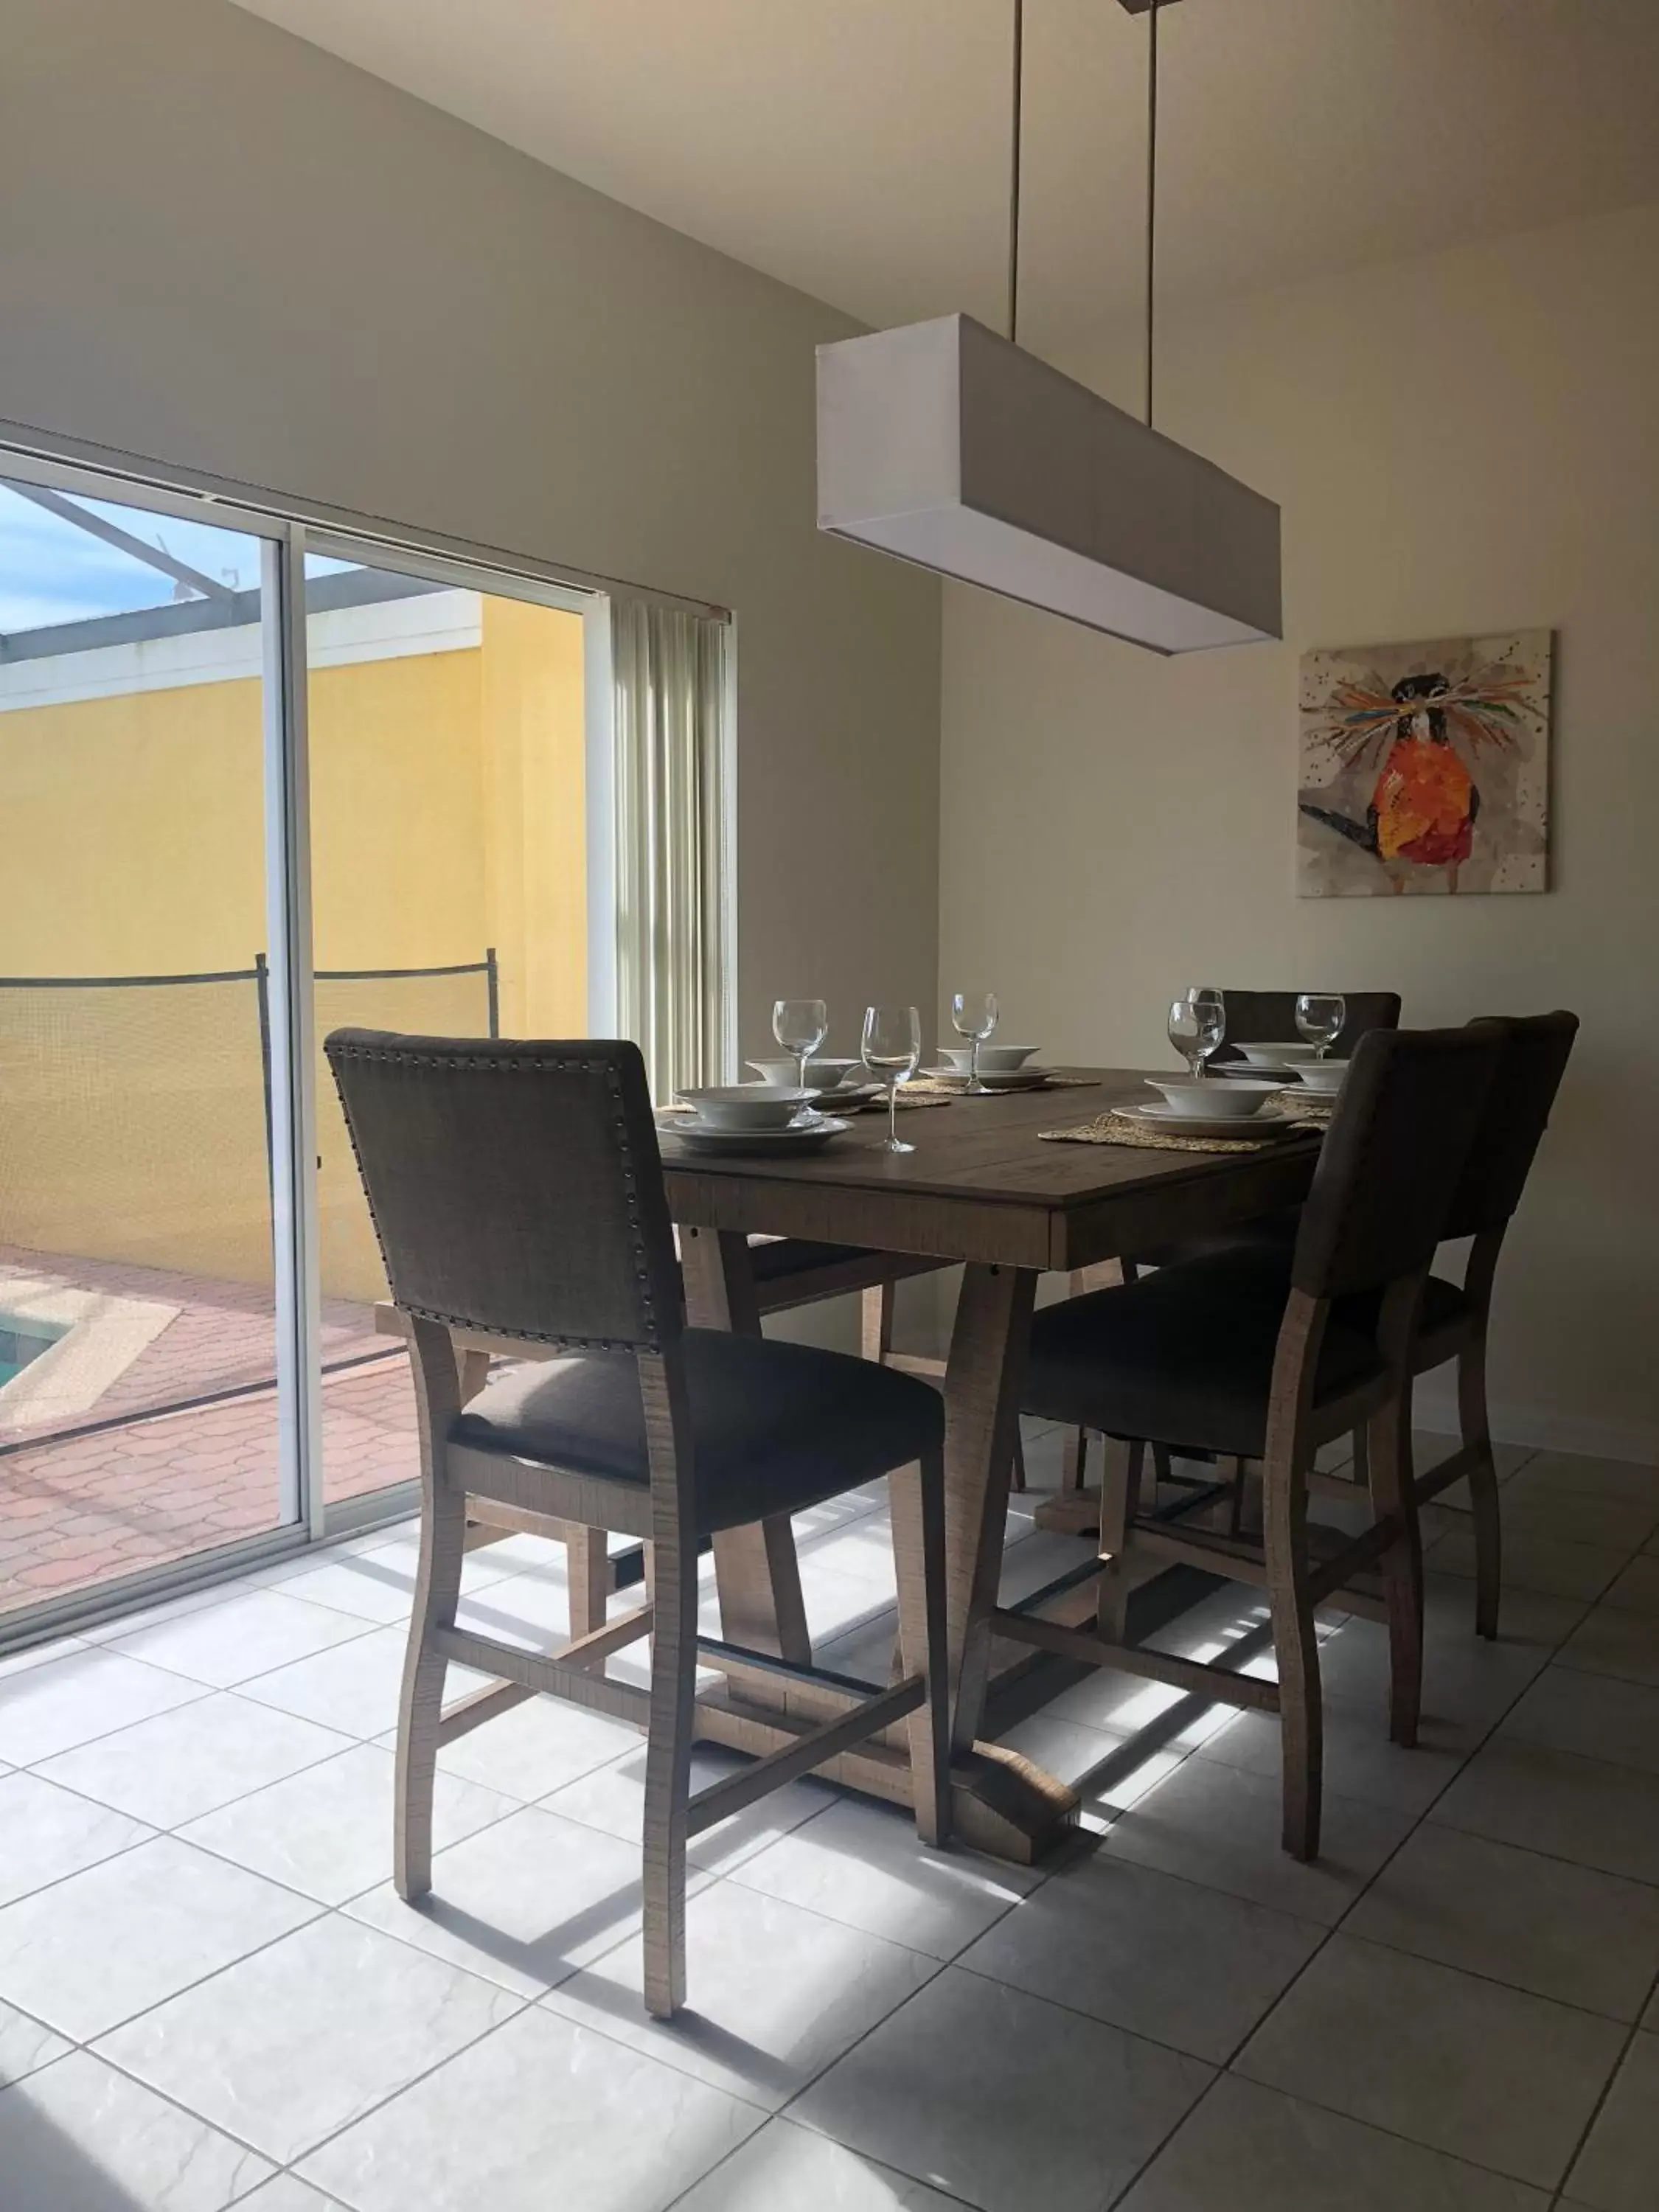 Decorative detail, Dining Area in Encantada Resort Vacation Townhomes by IDILIQ